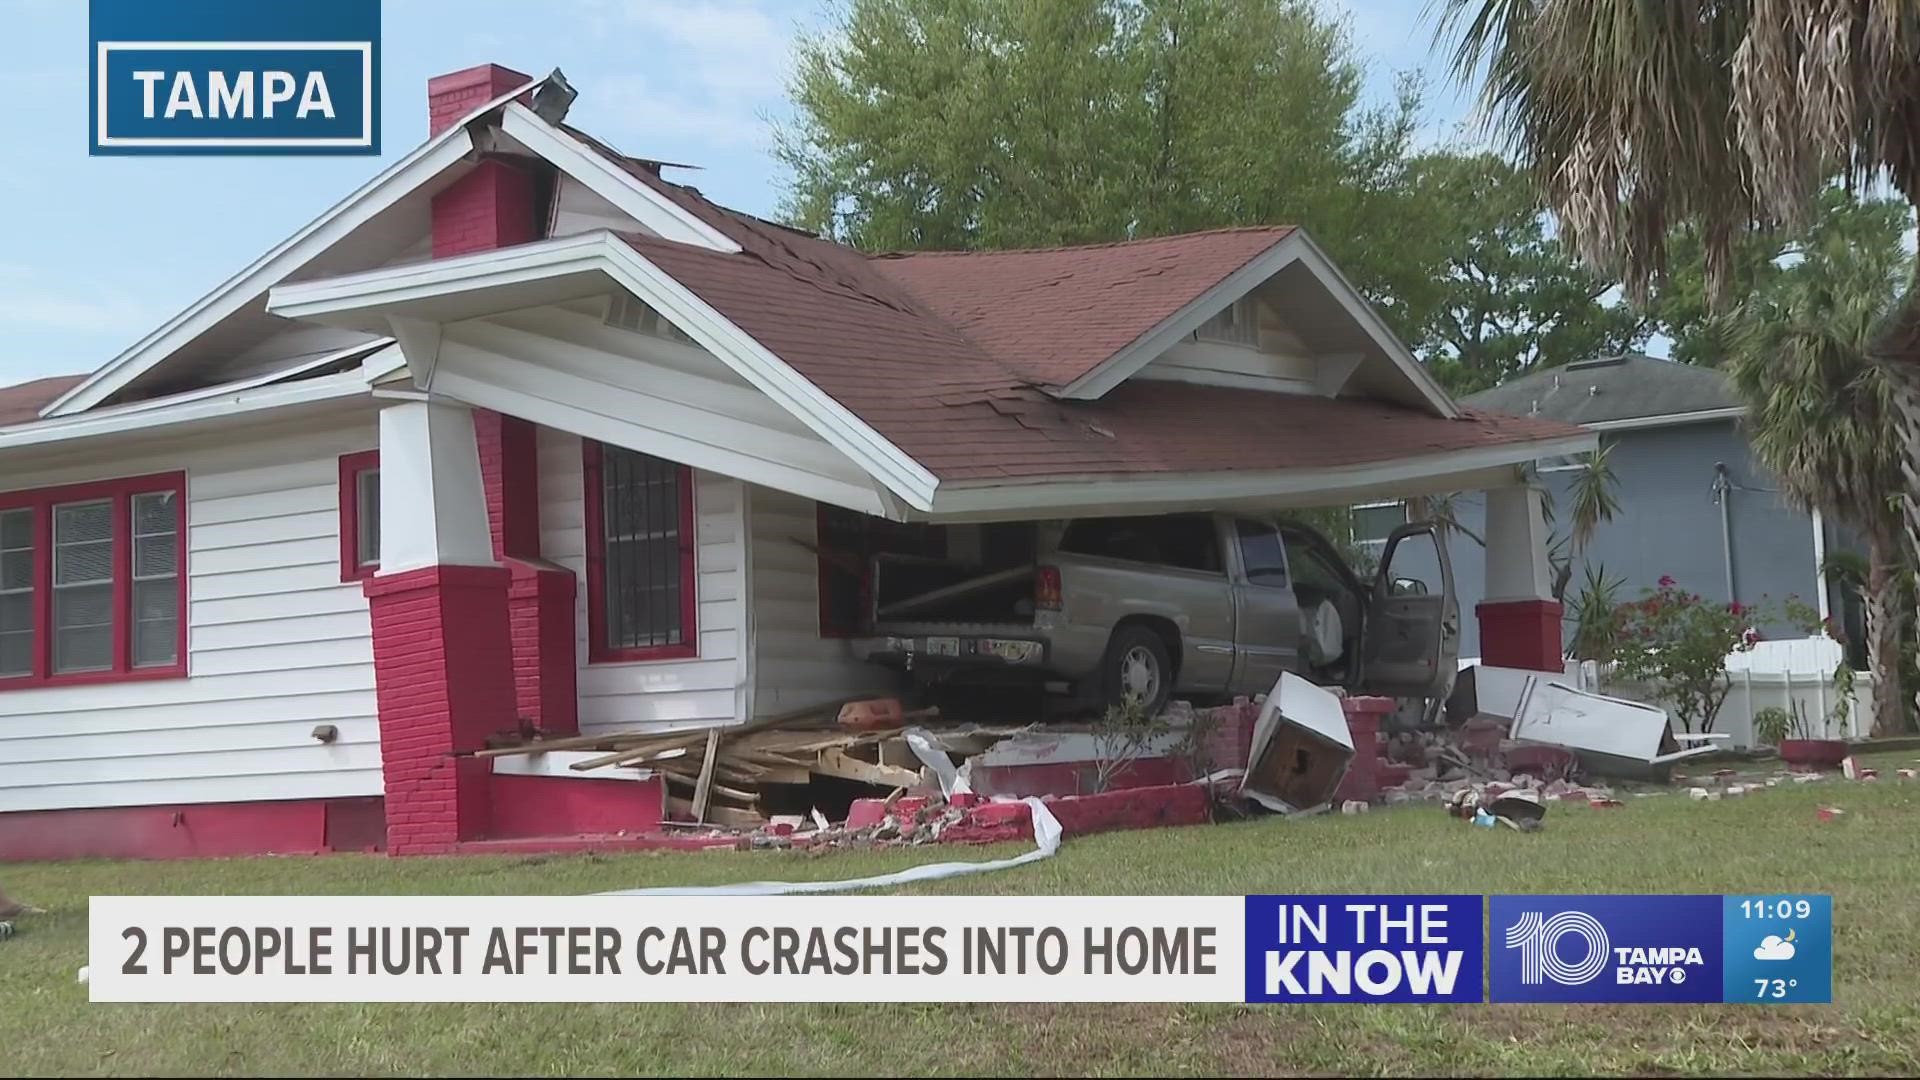 Authorities said an 80-year-old man was driving at the time of the crash.